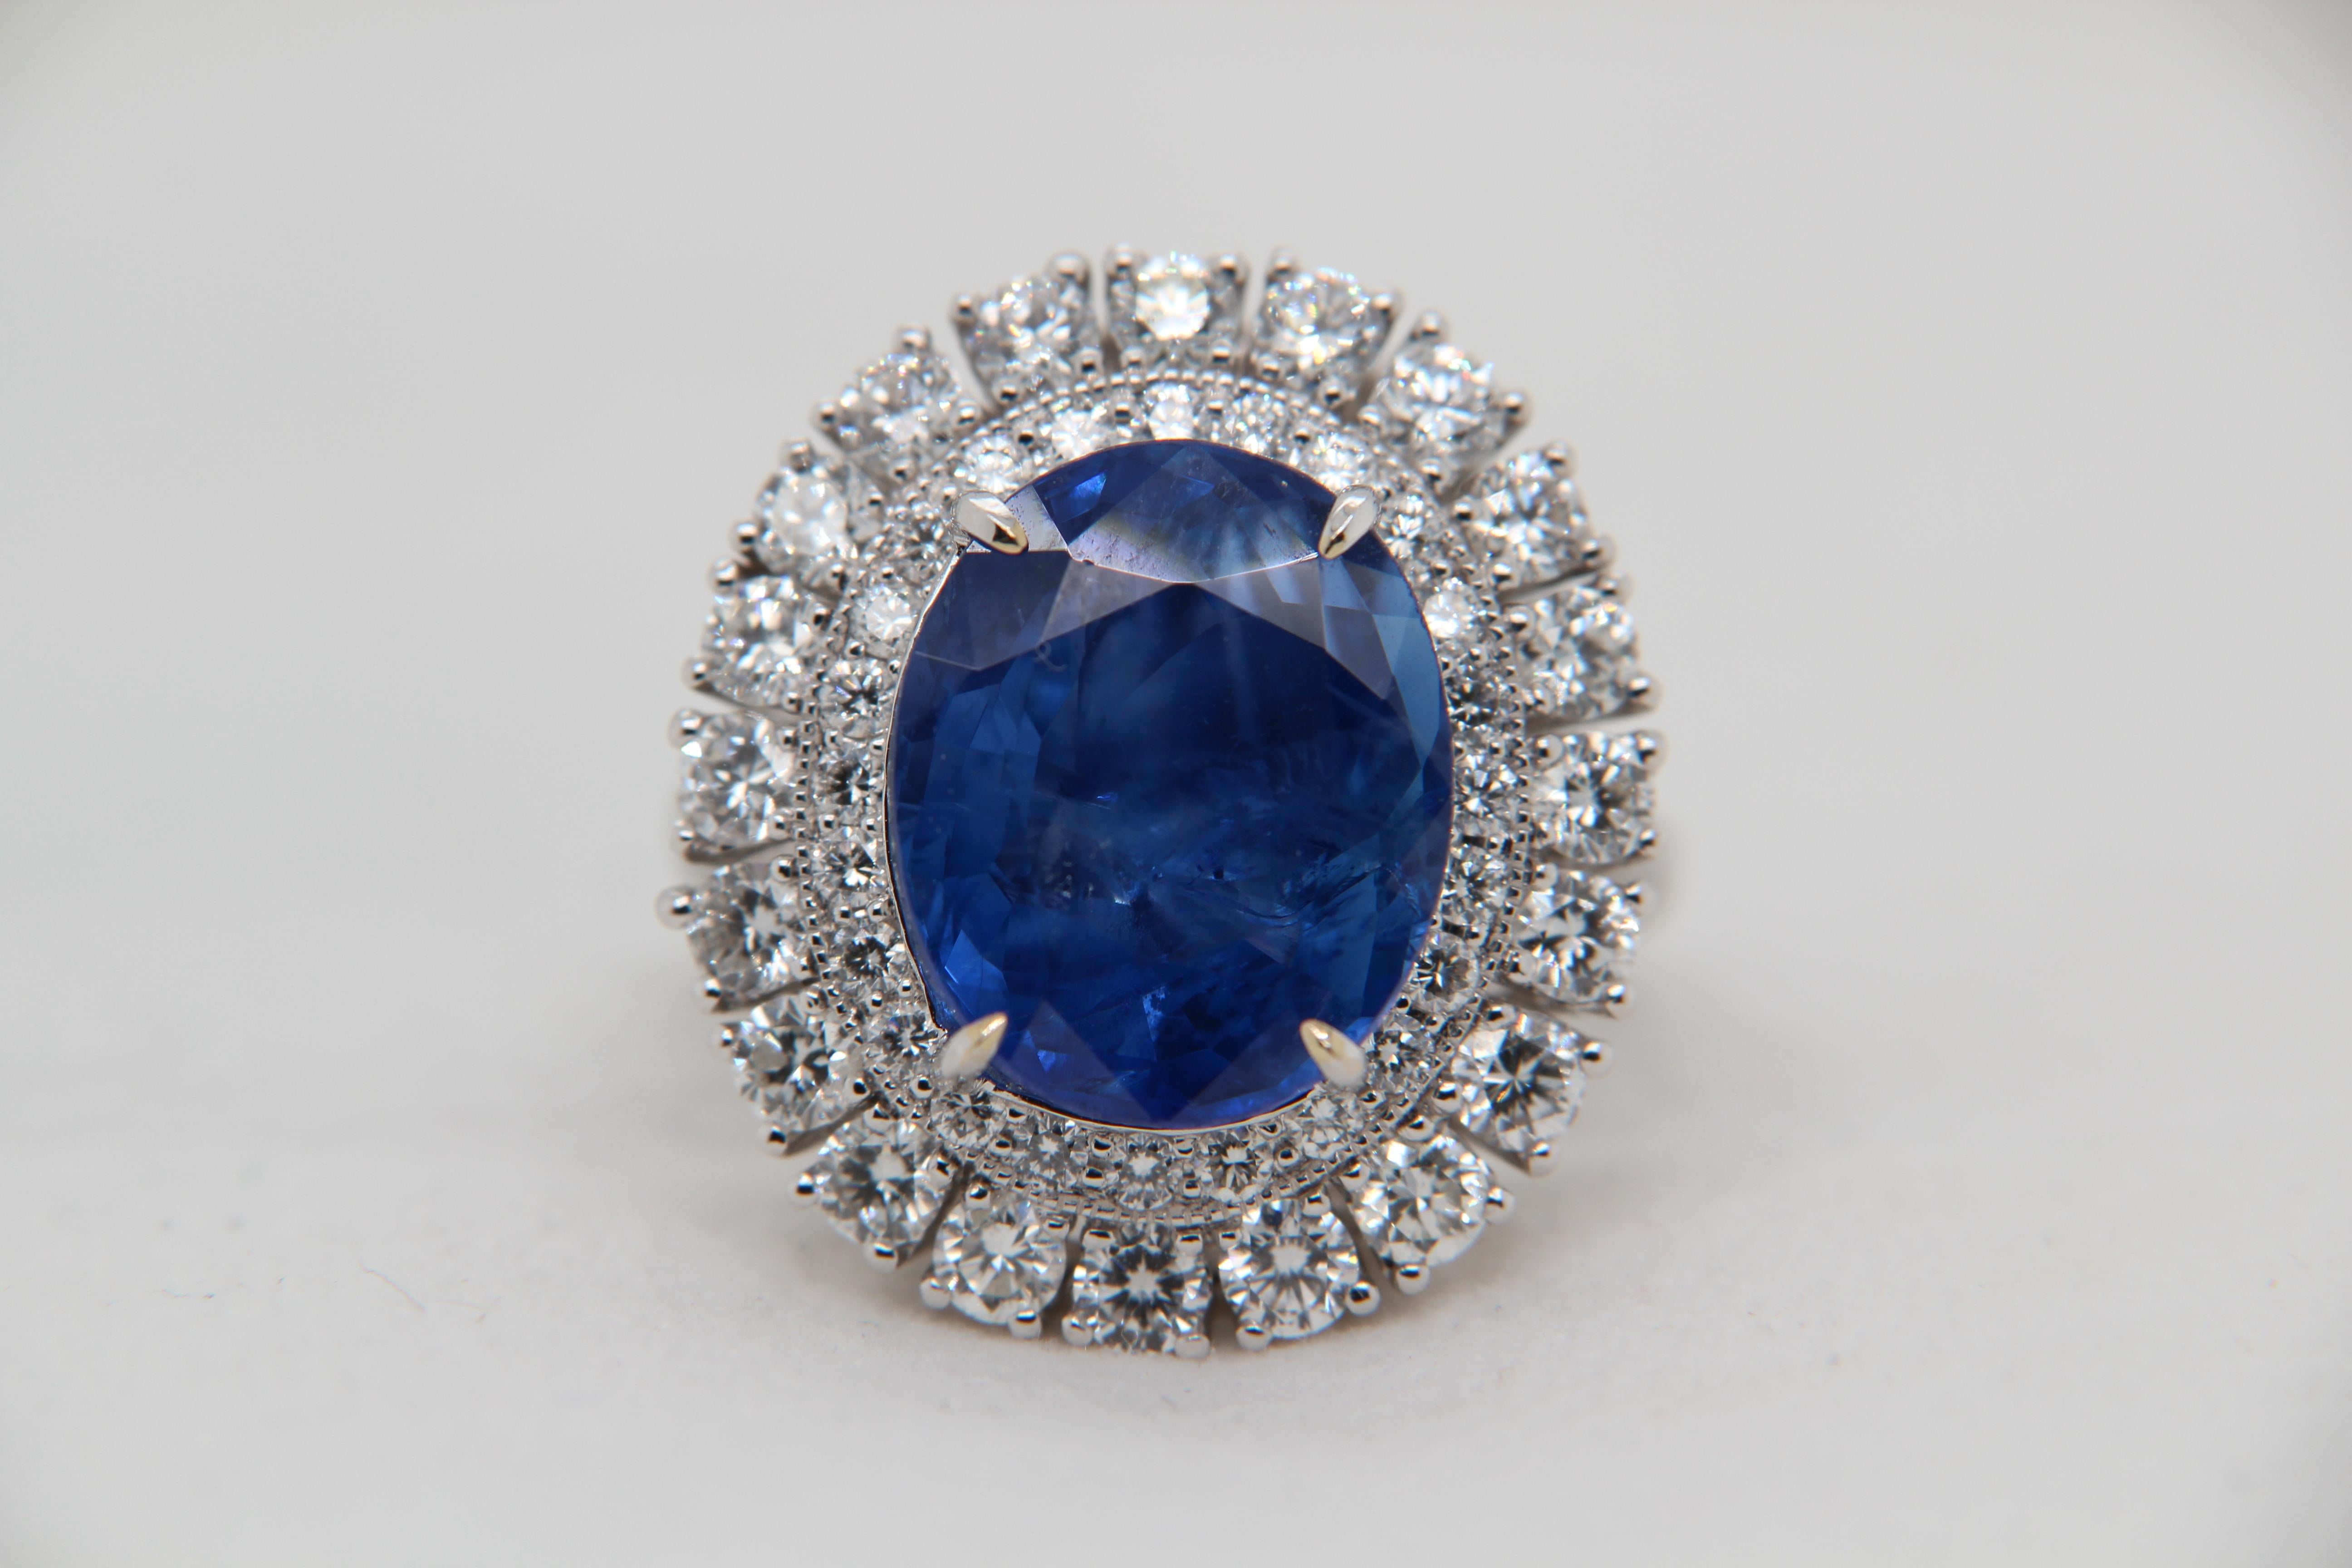 A blue sapphire and diamond ring. The ring's center stone is 9.66 carat Burmese Blue Sapphire certified by Gemological Institute of India (GII). The center stone is surrounded by 2.05 carat round shaped diamonds and mounted on 18K white gold gross